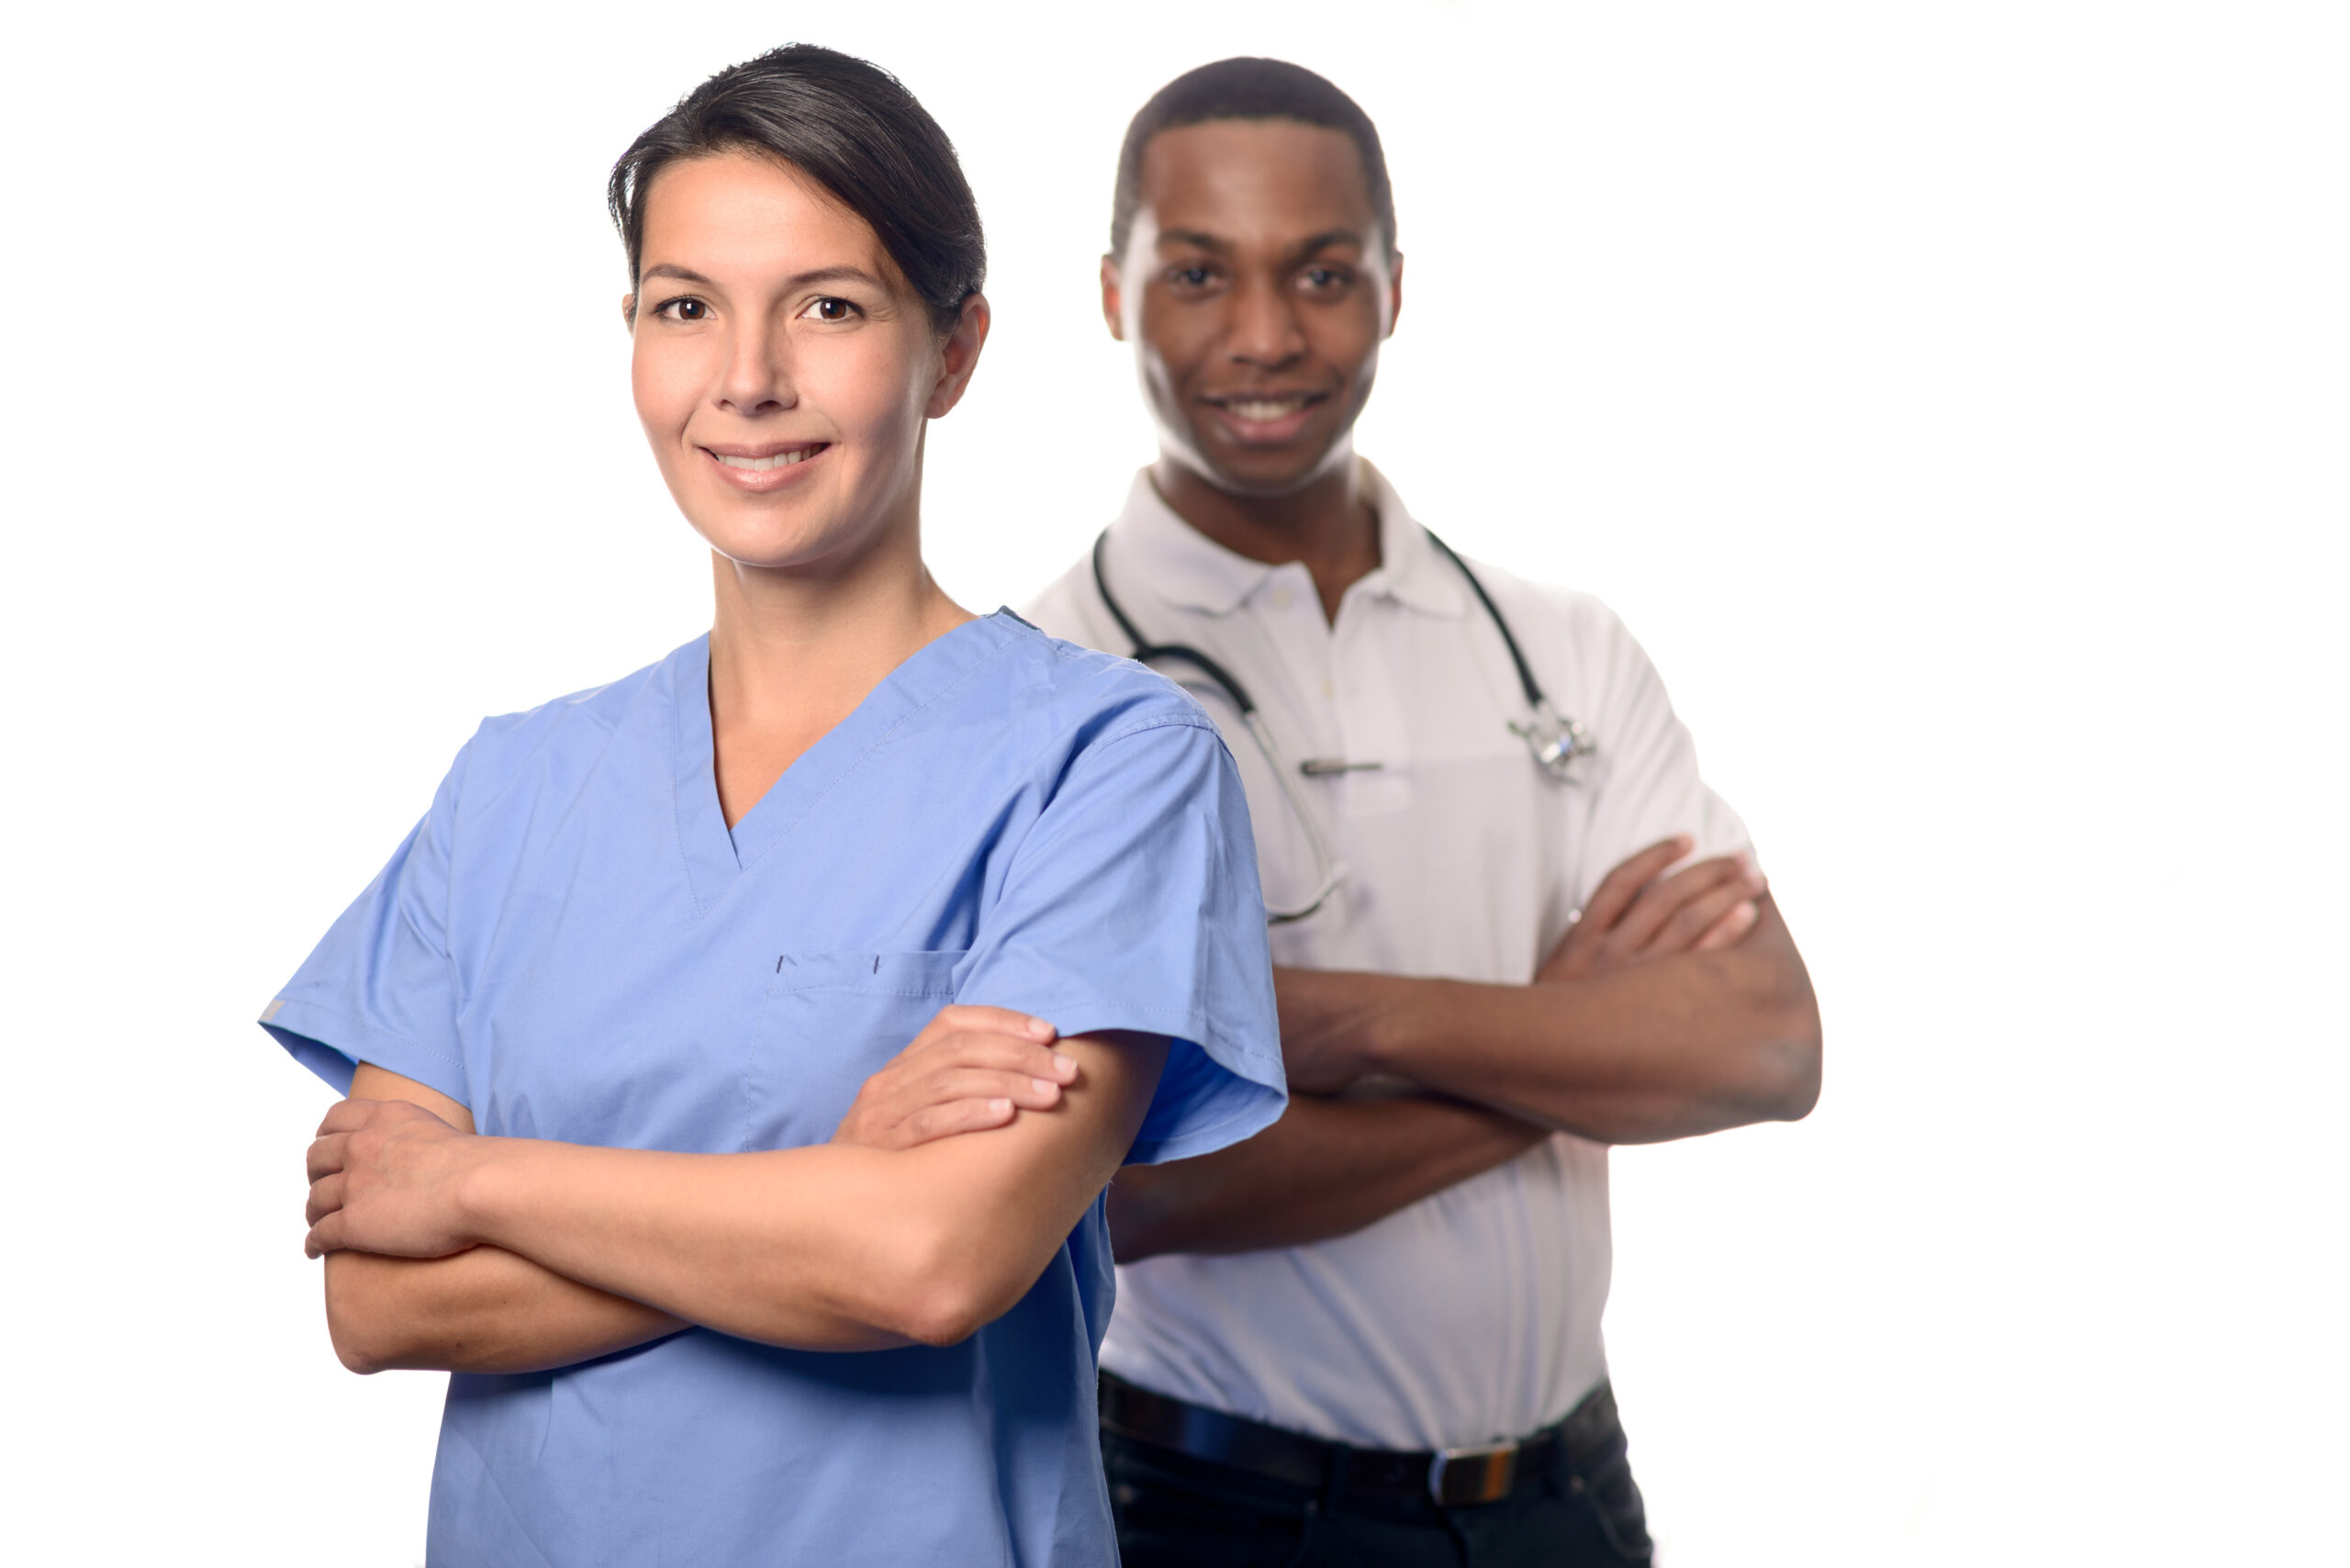 Successful attractive female doctor or surgeon in scrubs standing with folded arms in front of an African male doctor or consultant conceptual of an expert medical team, on white